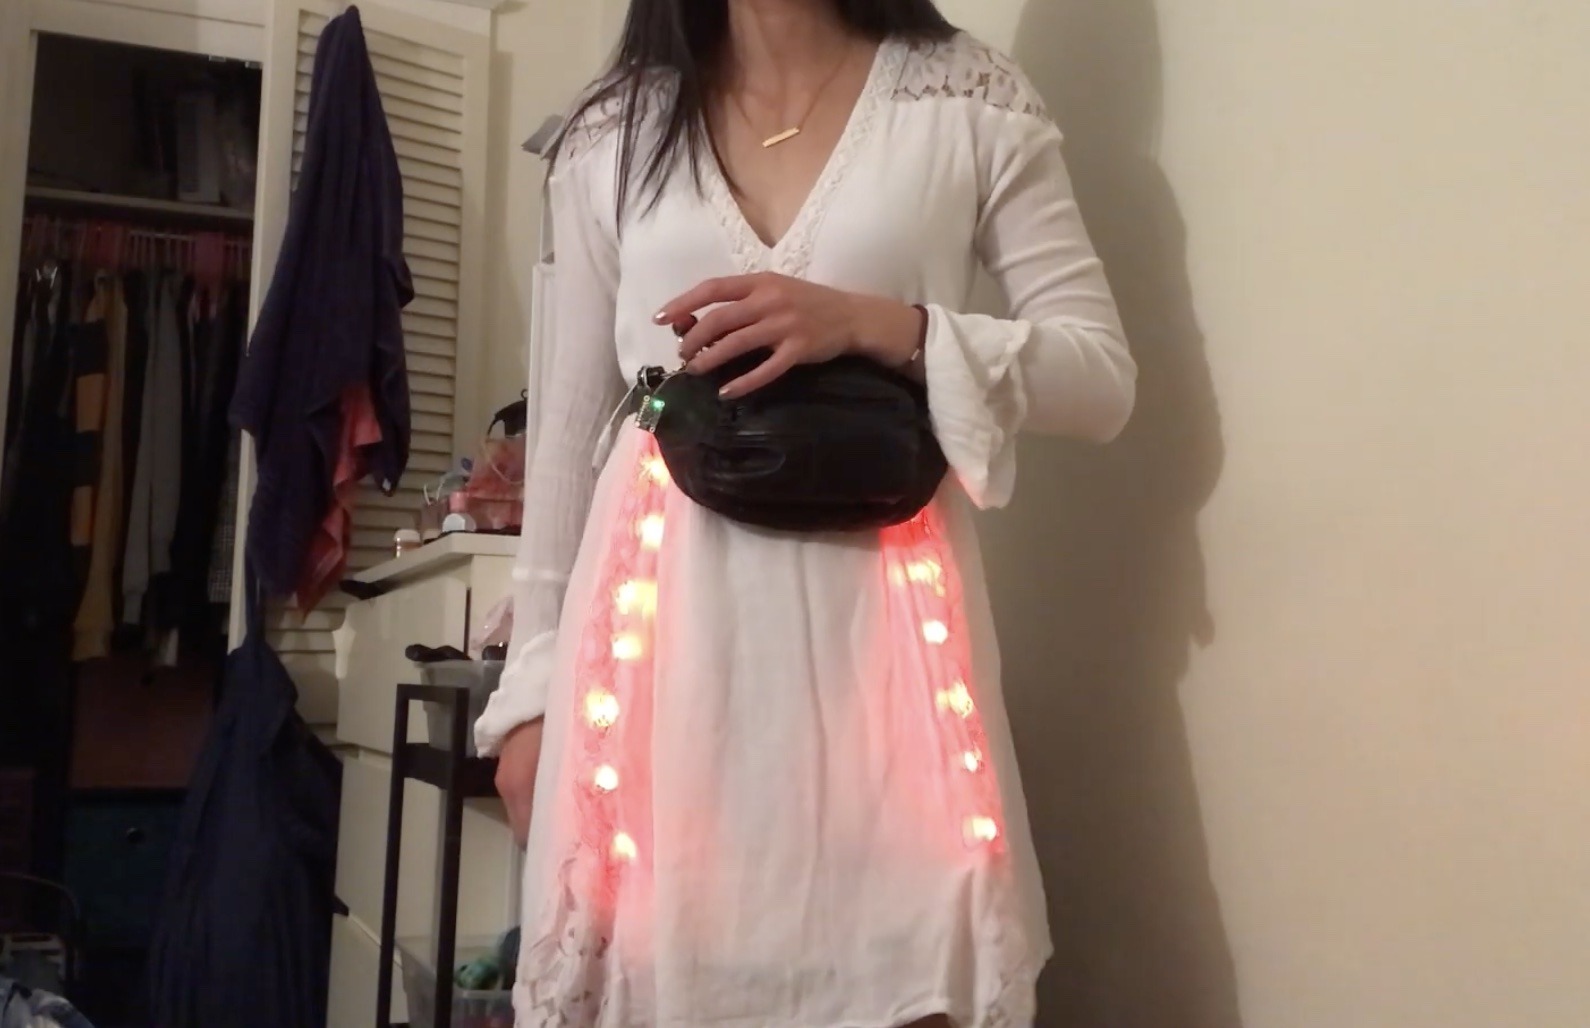 This maker designed an interactive LED-lit dress inspired by Katniss Everdeen’s